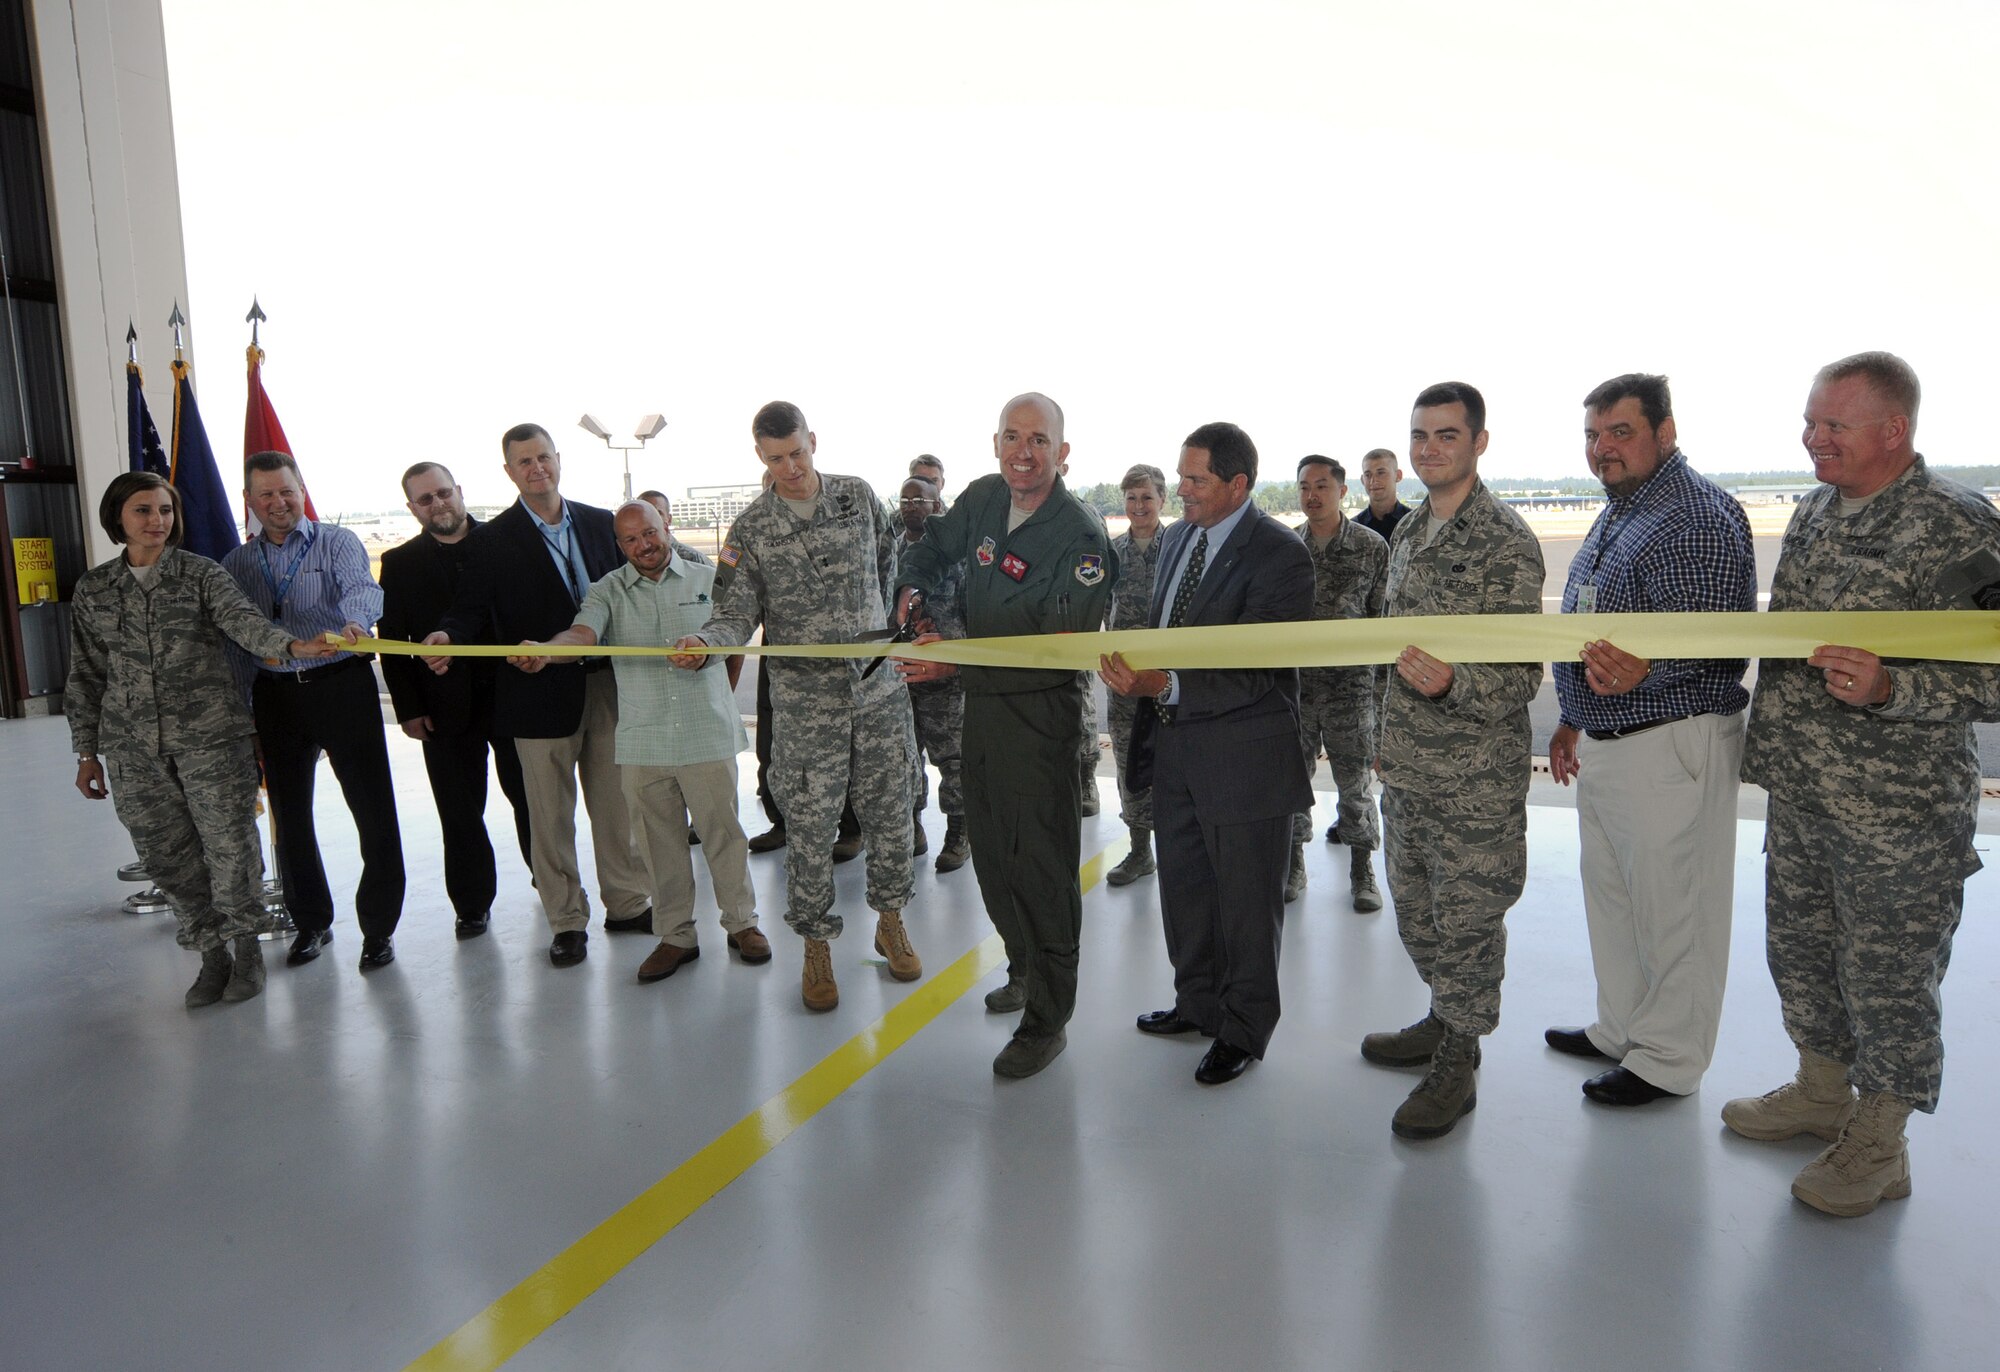 Oregon Air National Guard Col. Paul T. Fitzgerald, 142nd Fighter Wing commander, center right, and Oregon Army National Guard Maj. Gen. Daniel R. Hokanson, Adjutant General, Oregon, center left, along with other dignitaries, take part in a ribbon cutting ceremony for a new alert barn at the Portland Air National Guard Base, Ore., July 10. The new alert barn will play a key role in the Aerospace Control Alert mission that the 142nd Fighter Wing performs to protect the skies over the Pacific Northwest. (U.S. Air National Guard photo by Tech. Sgt. John Hughel, 142nd Fighter Wing Public Affairs/Released)